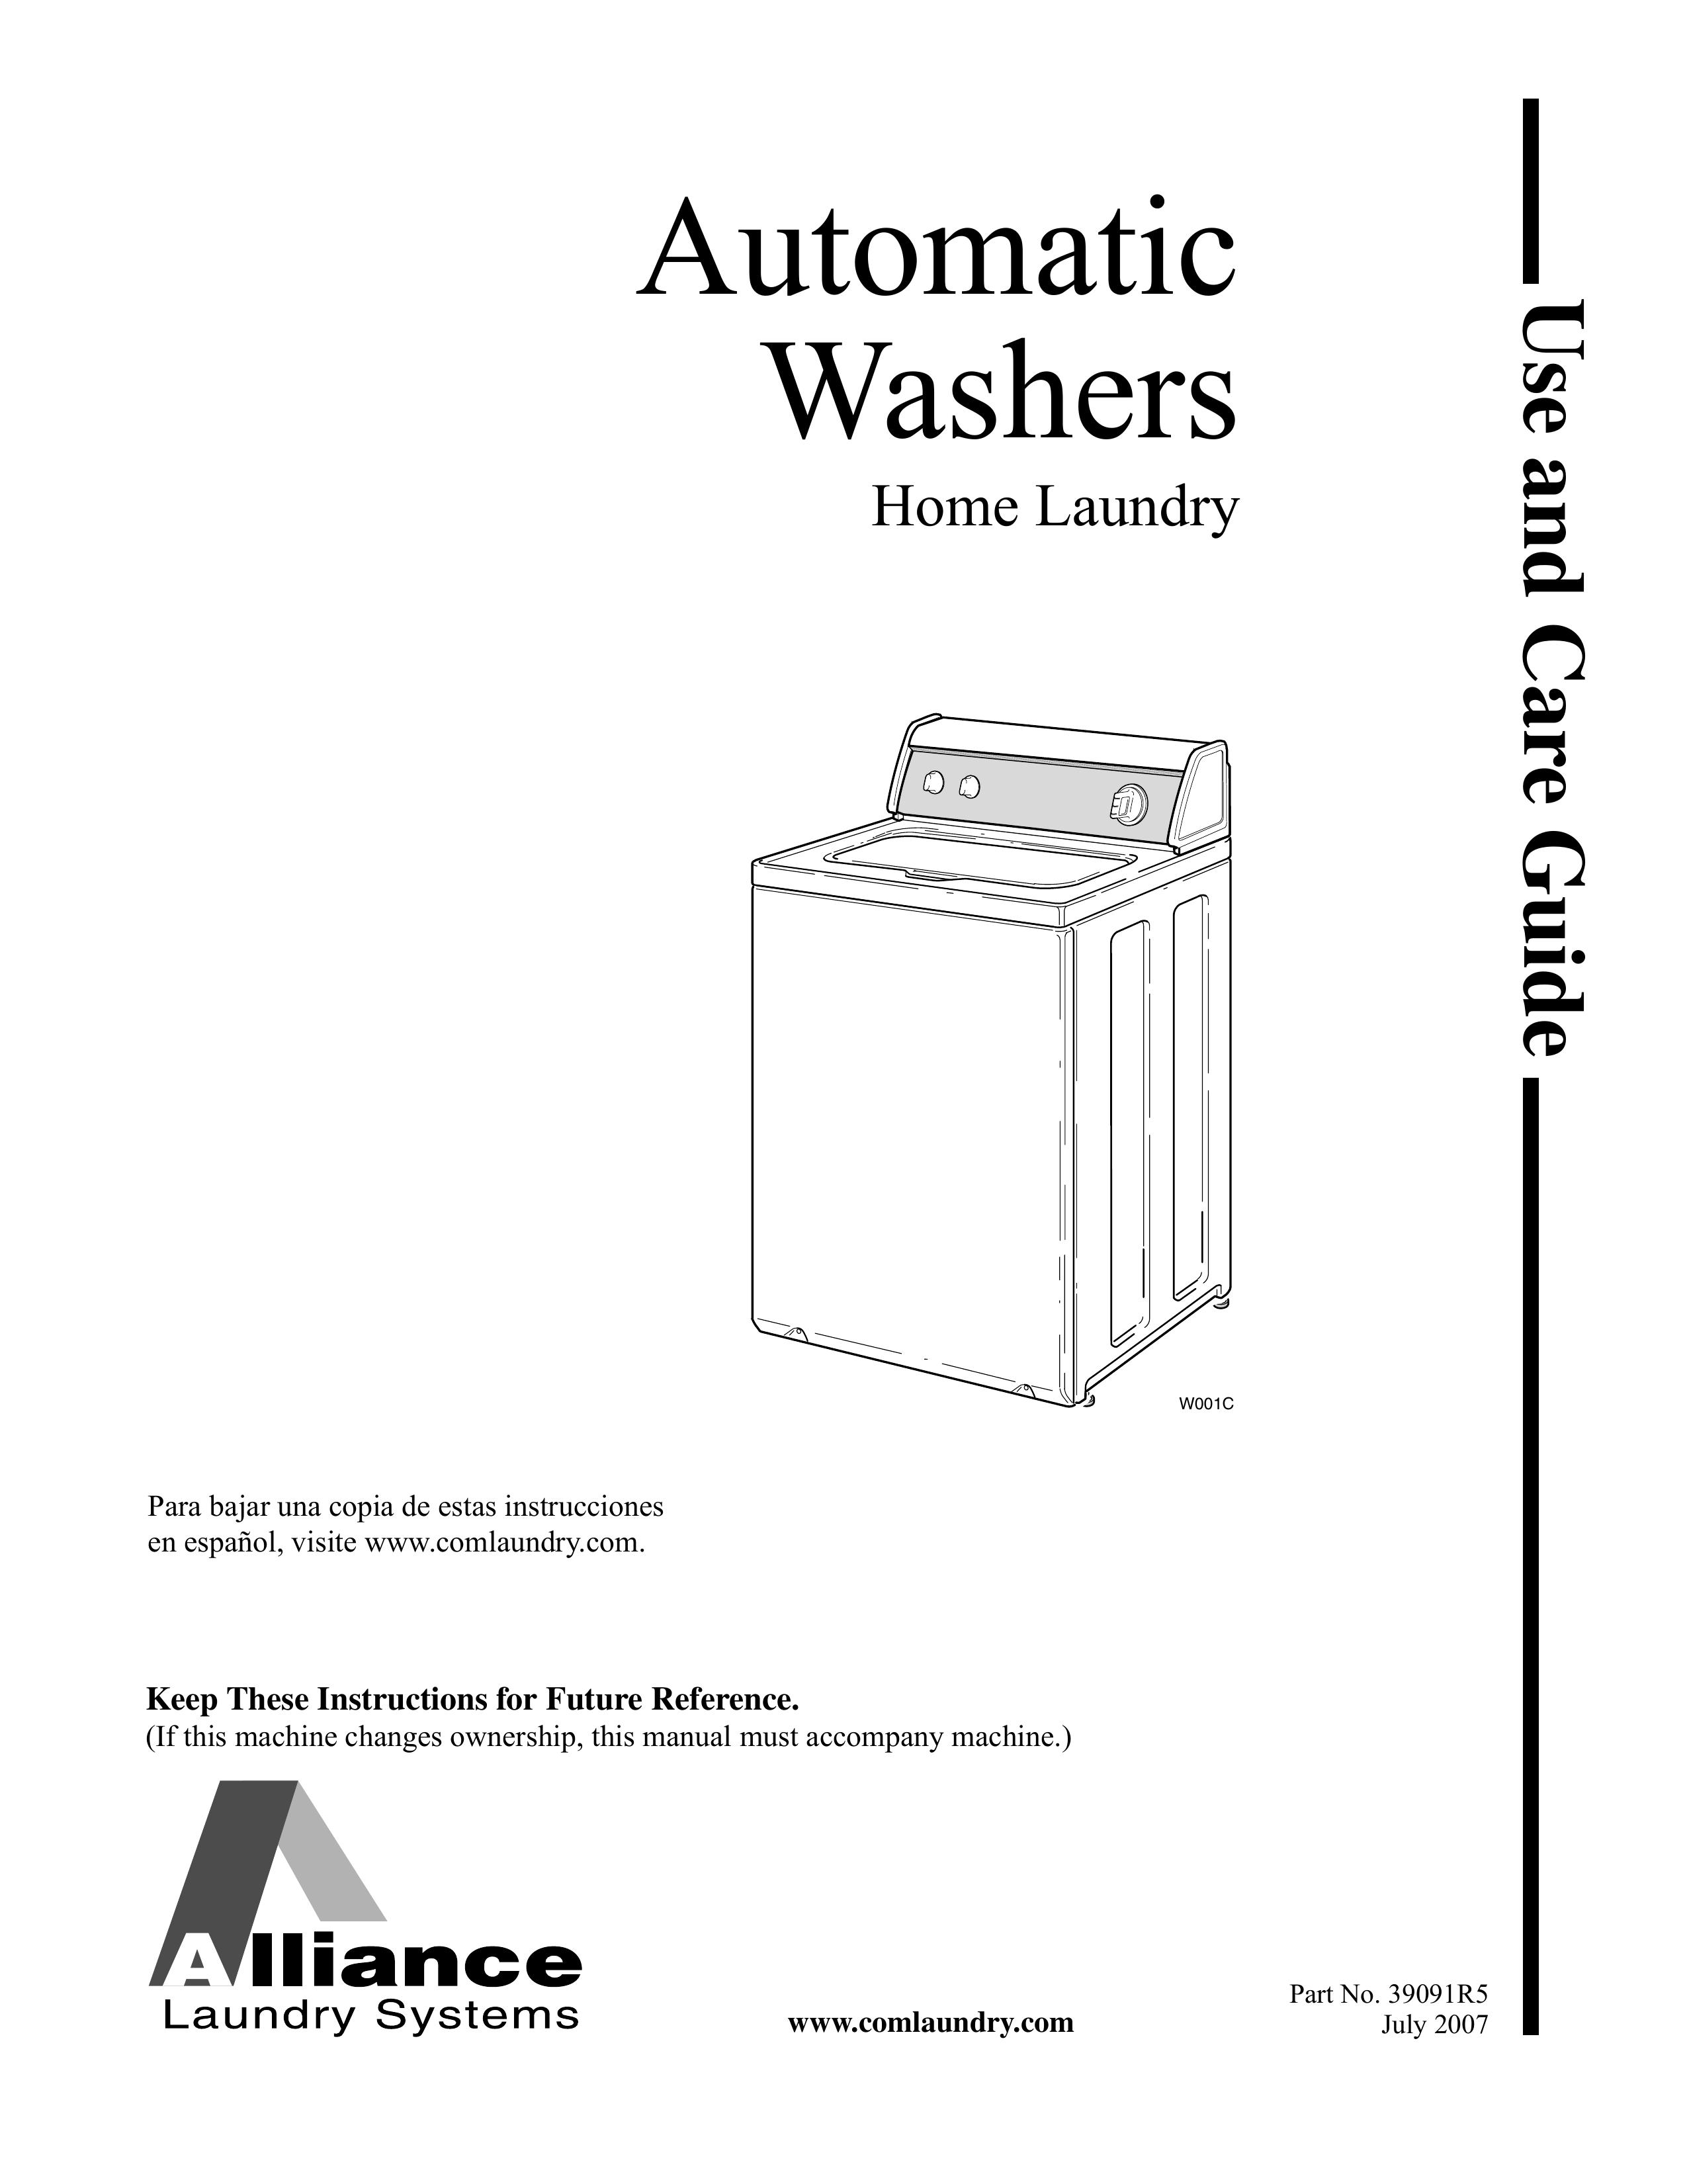 Alliance Laundry Systems LWS01B Washer/Dryer User Manual